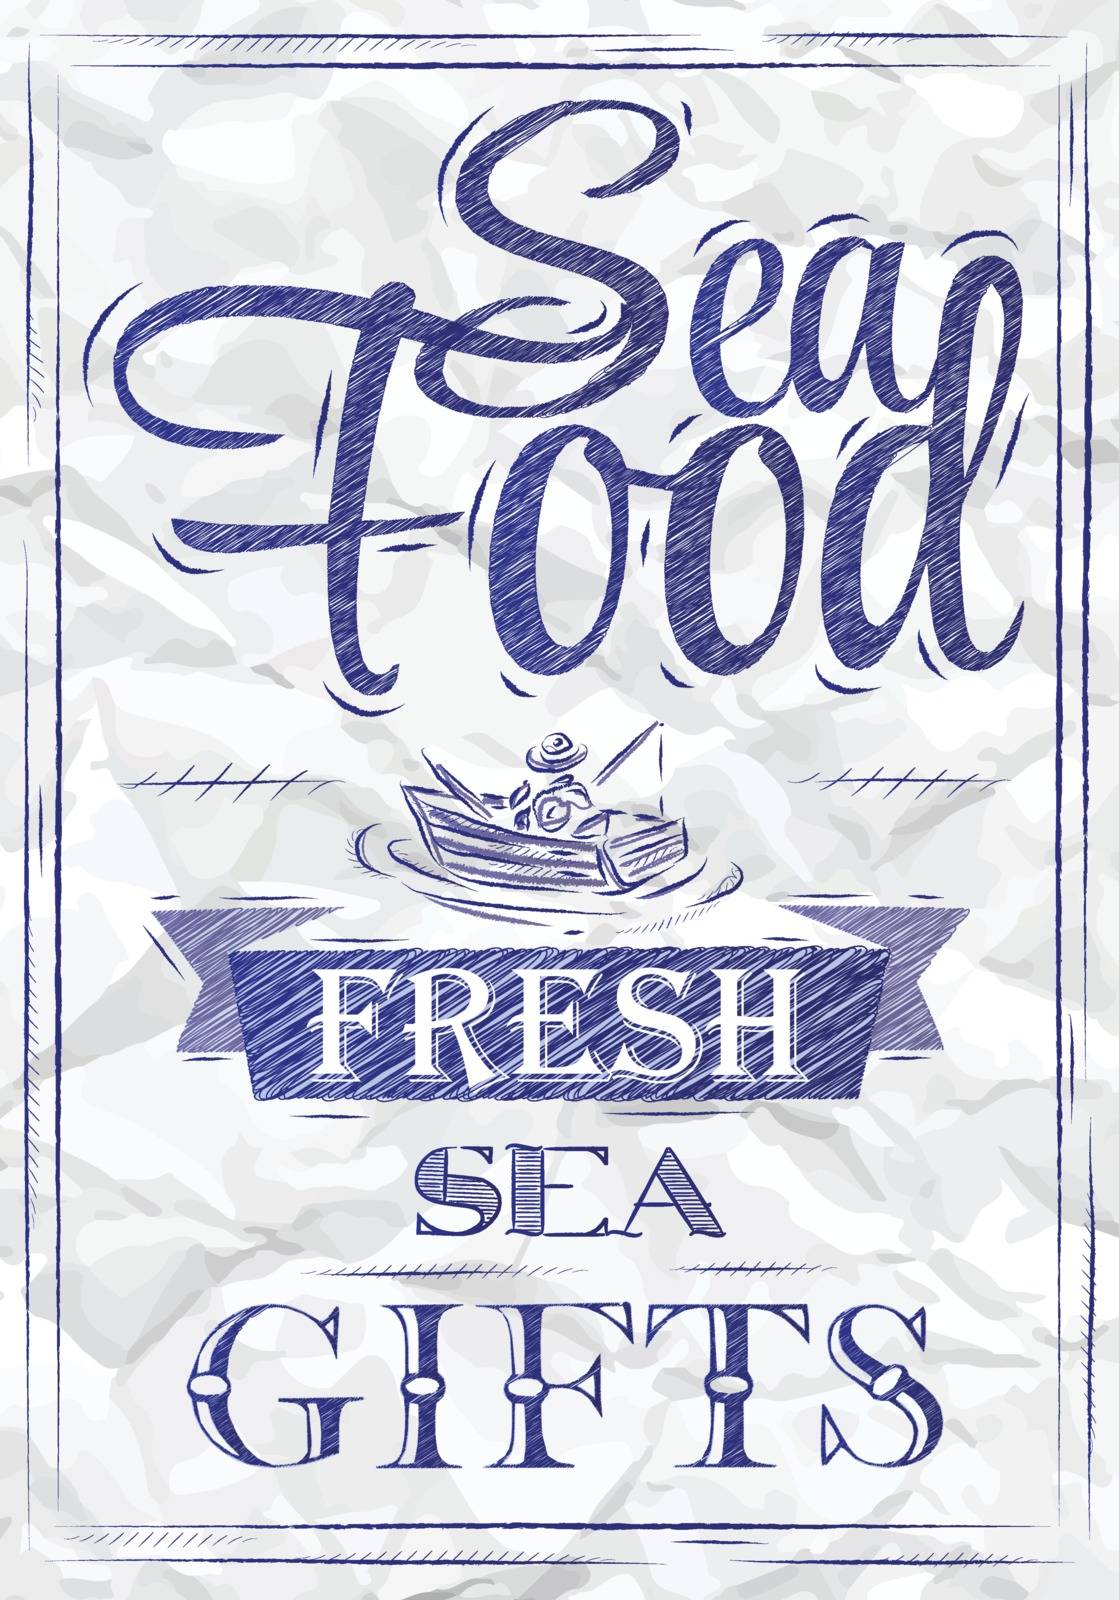 Poster Sea food fresh sea gifts in retro style stylized drawing of a blue pen on a crumpled paper.